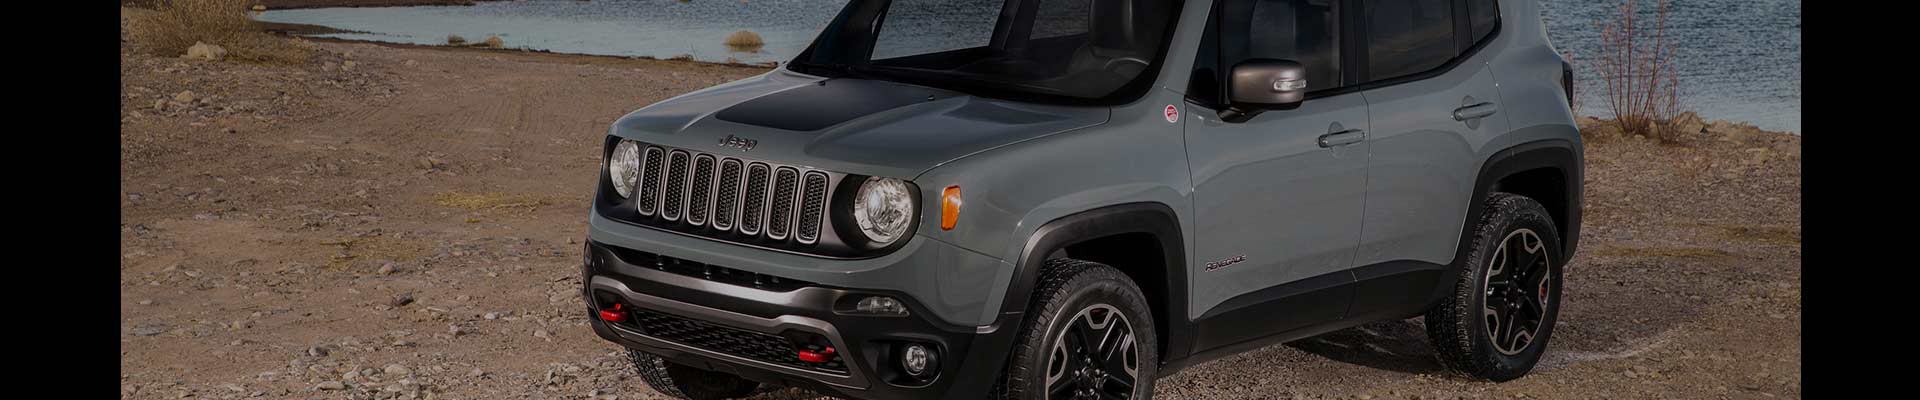 Shop Replacement and OEM 2016 Jeep Renegade Parts with Discounted Price on the Net